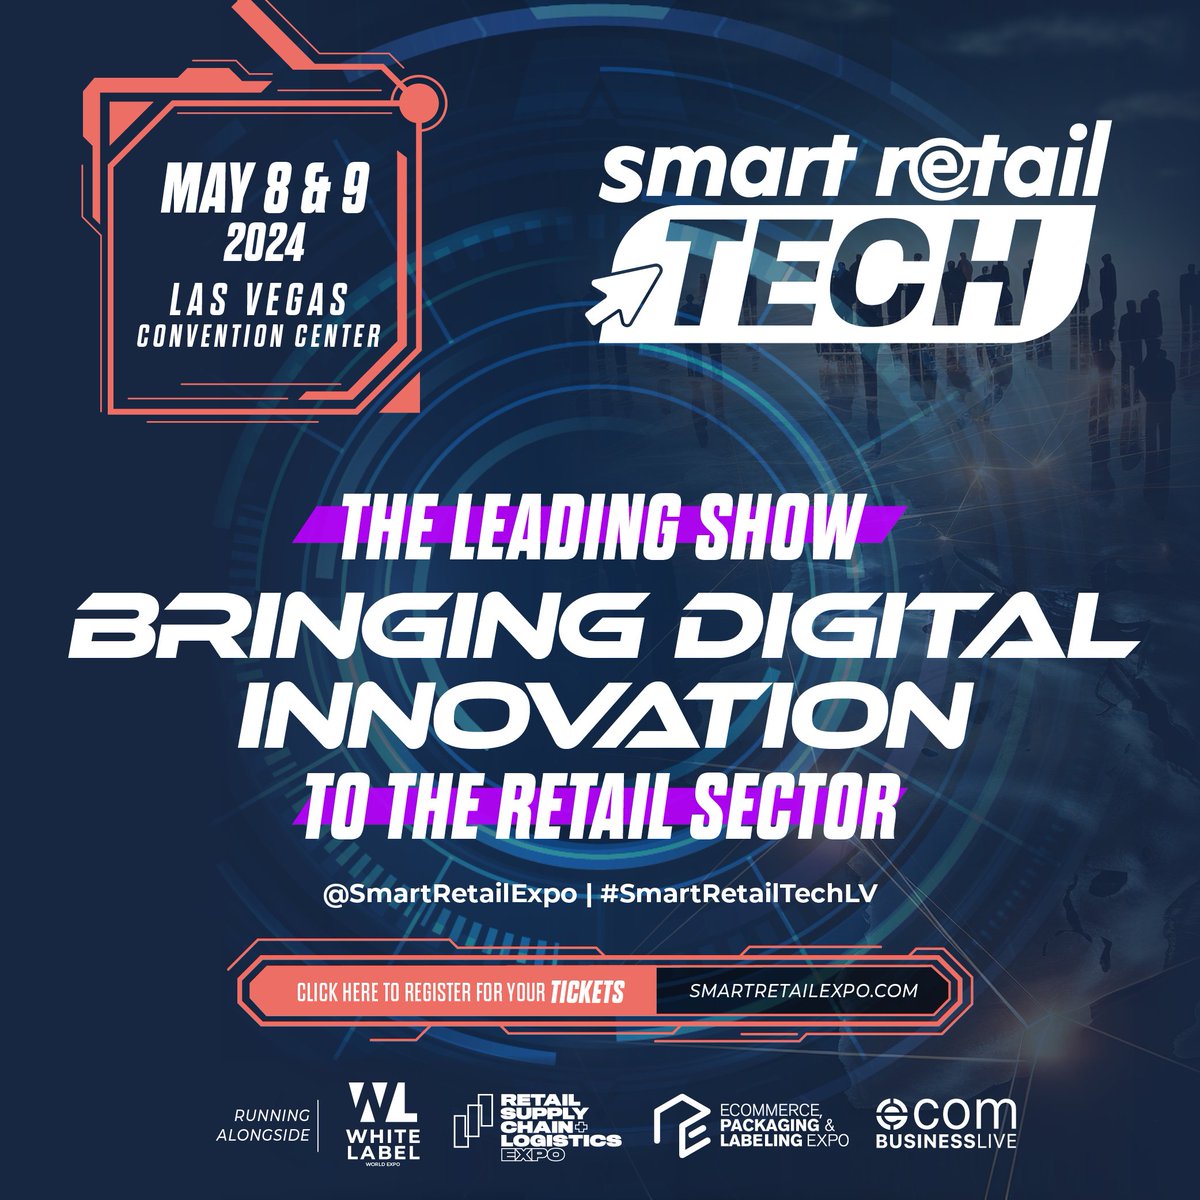 We're thrilled to announce that we have partnered with the @smartretailexpo bringing digital innovation to the retail sector will be returning to the Las Vegas Convention Center for May 8th & 9th! Register for your FREE tickets here bitly.ws/3f9h8 #SmartRetailTechLV